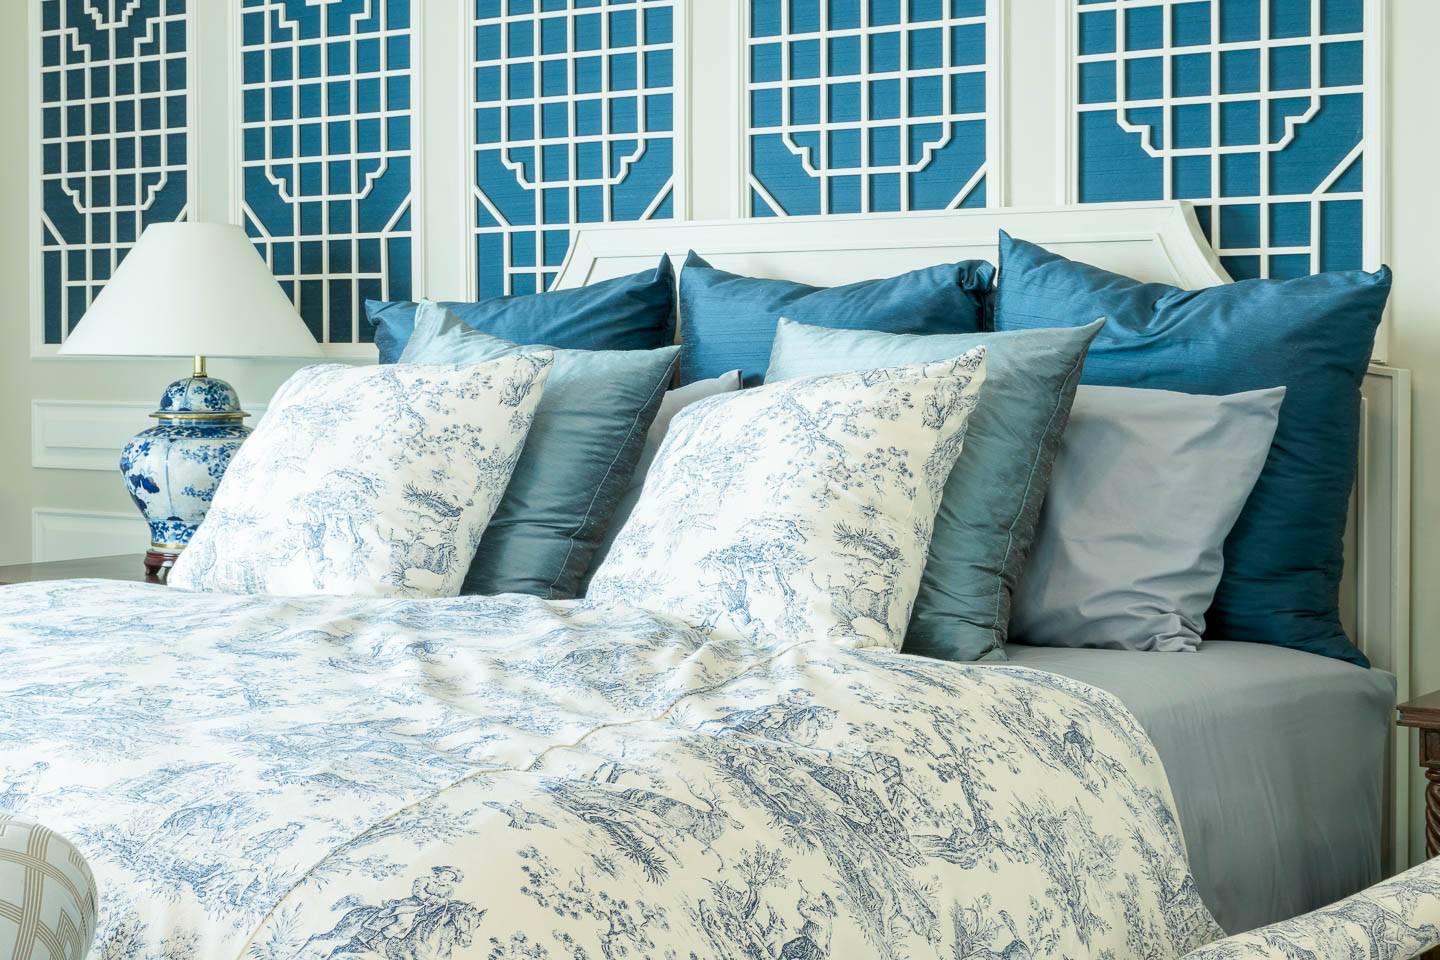 Bedroom with blue and white lattice panels behind a white bed frame with toile bedding